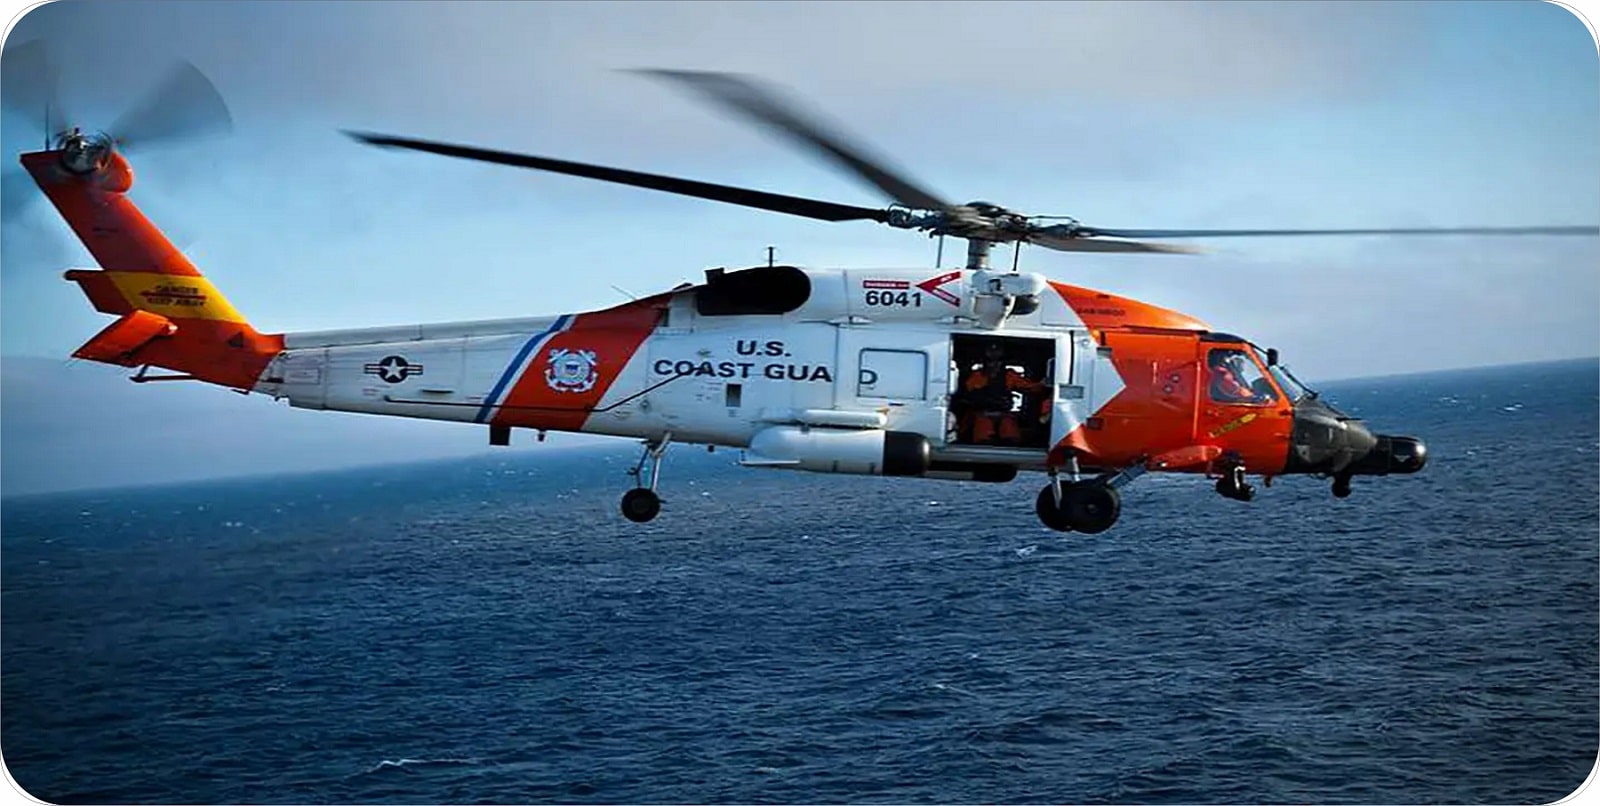 U.S. Coast Guard Helicopter Photo LICENSE PLATE